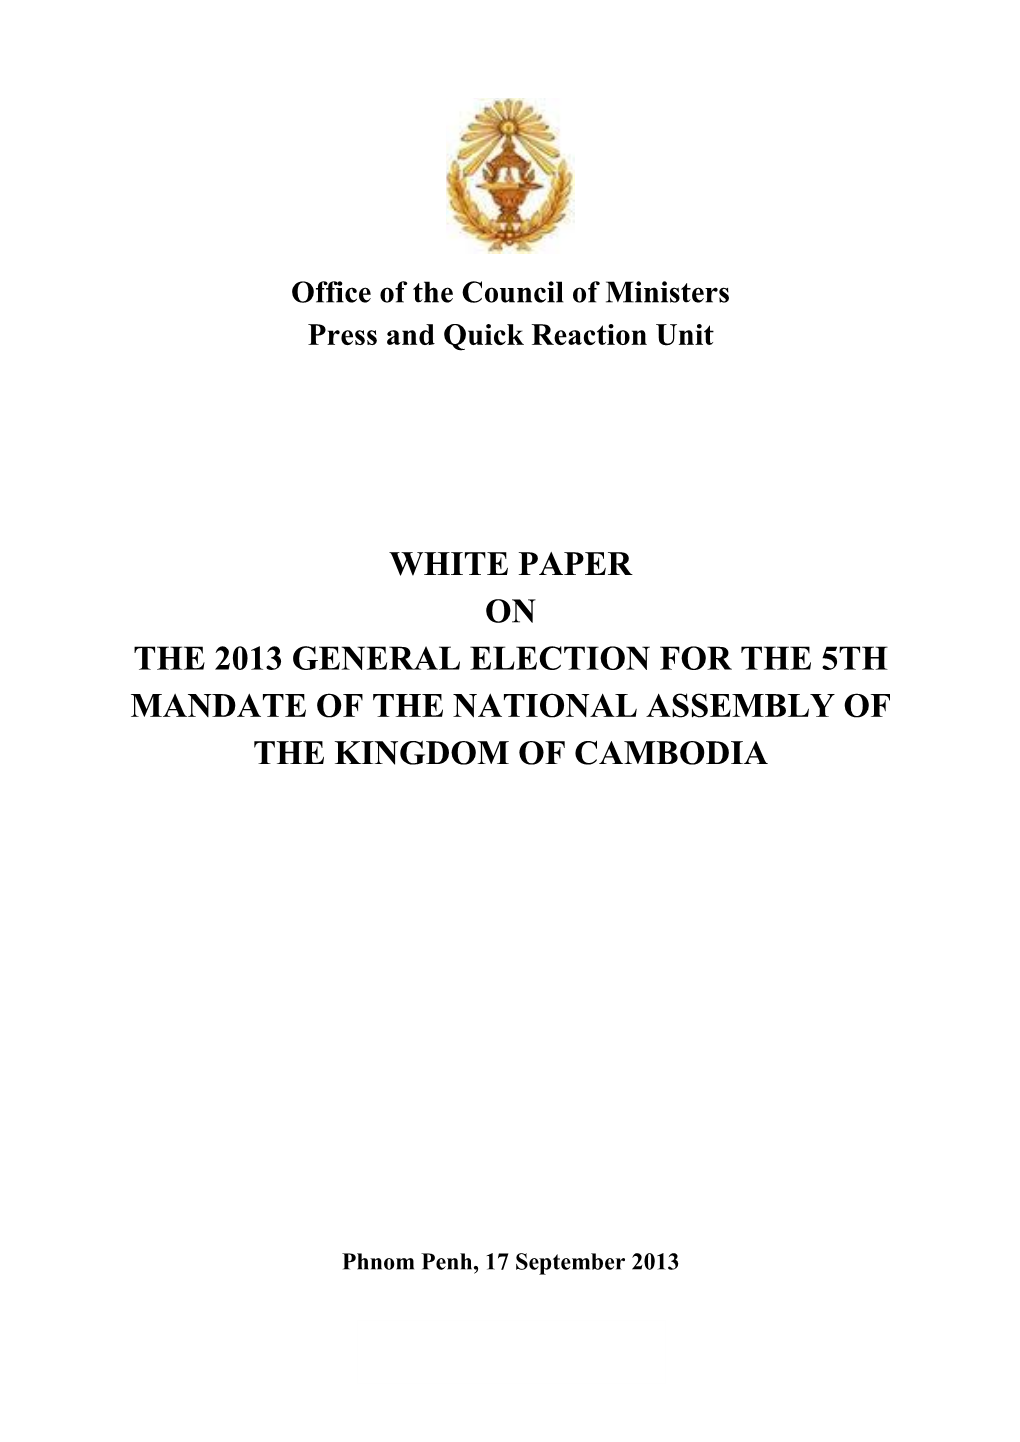 White Paper on the 2013 General Election for the 5Th Mandate of the National Assembly of the Kingdom of Cambodia